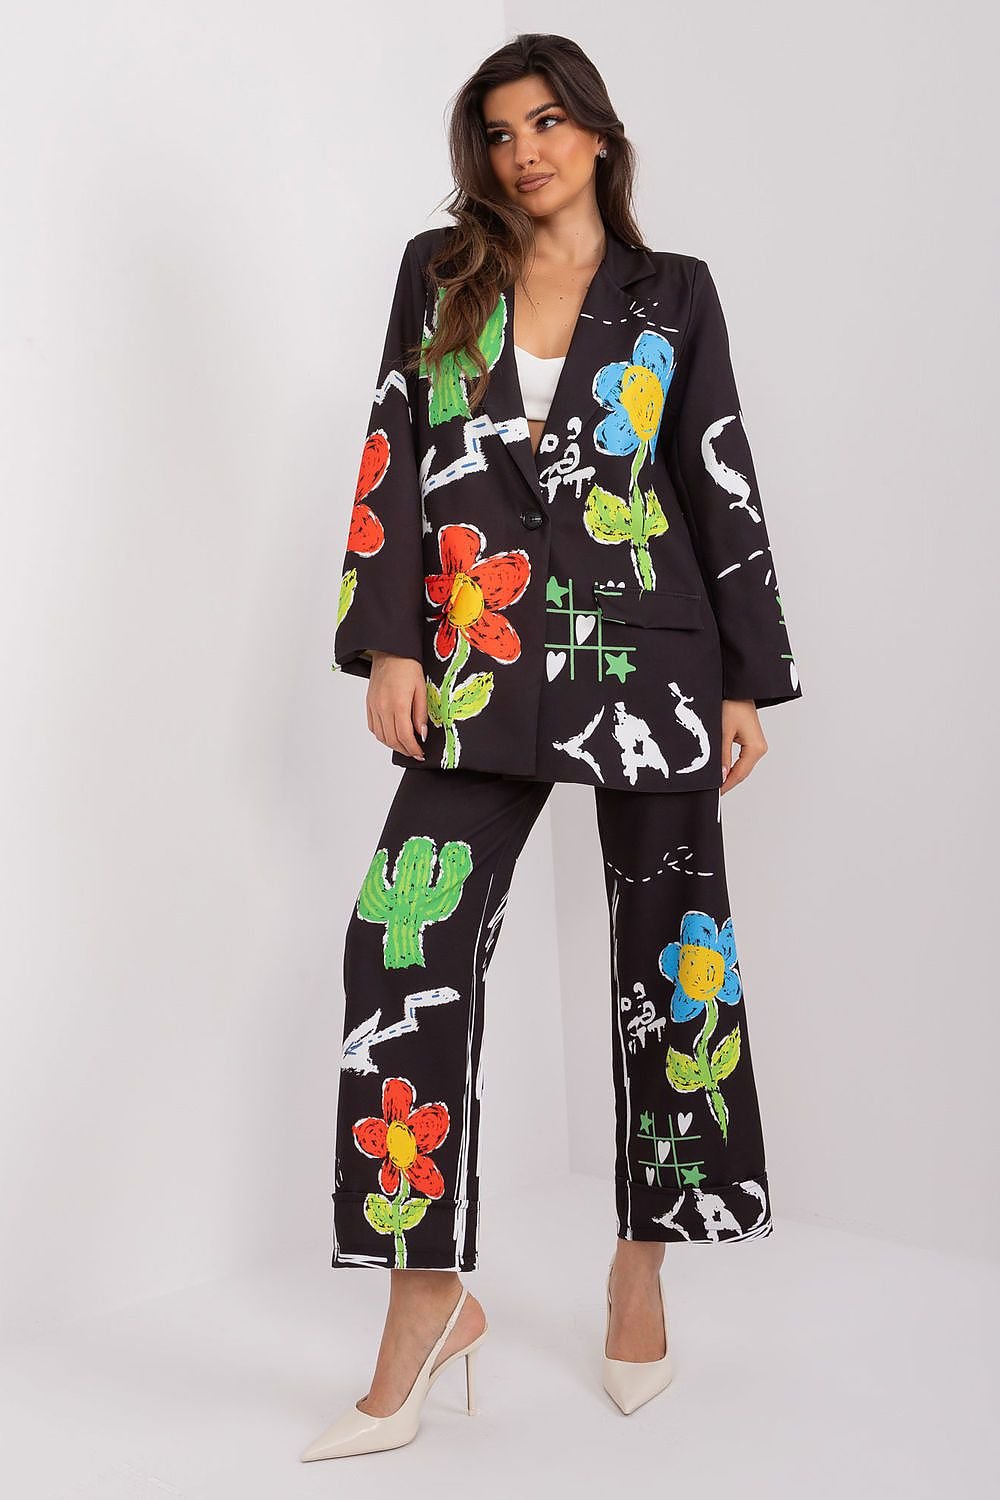 Chic Serenity Printed Suit Ensemble